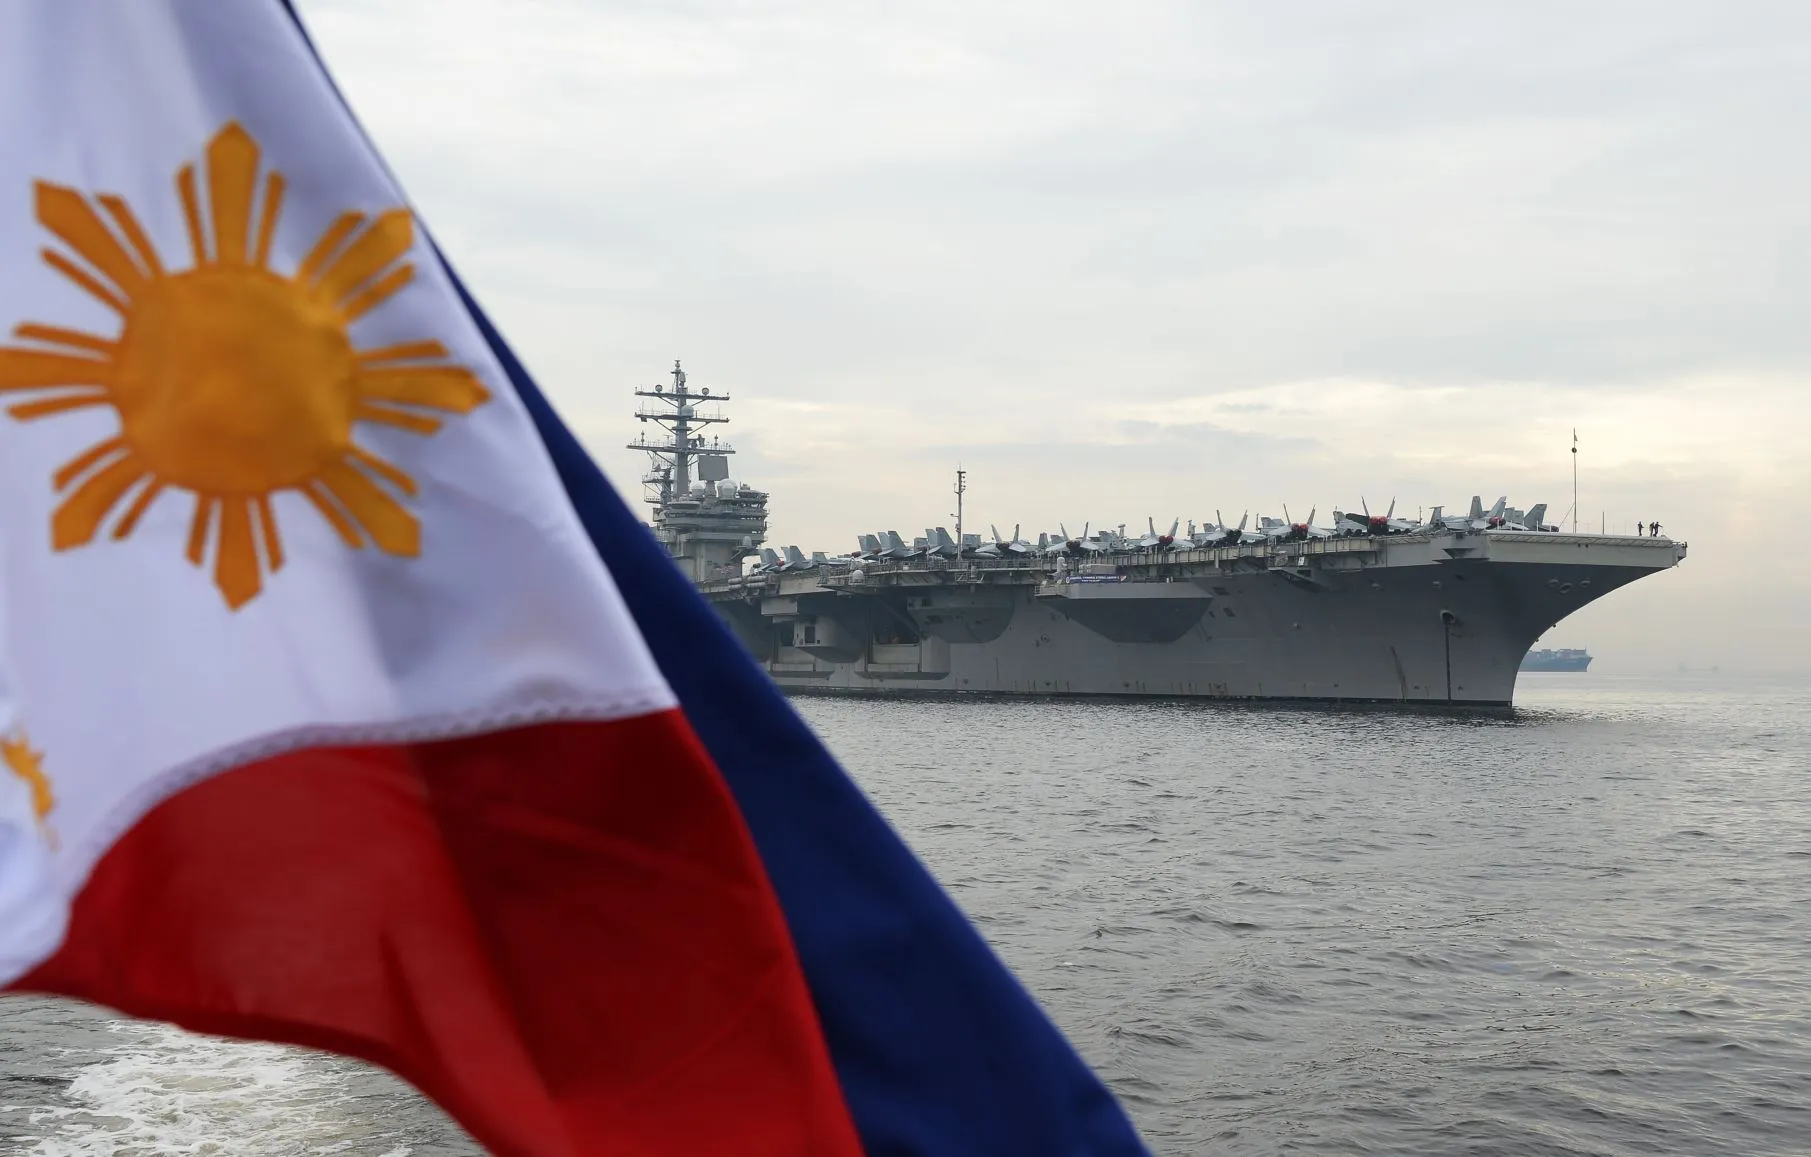 Philippines’ aspirational maritime power: Is it achievable by 2028?